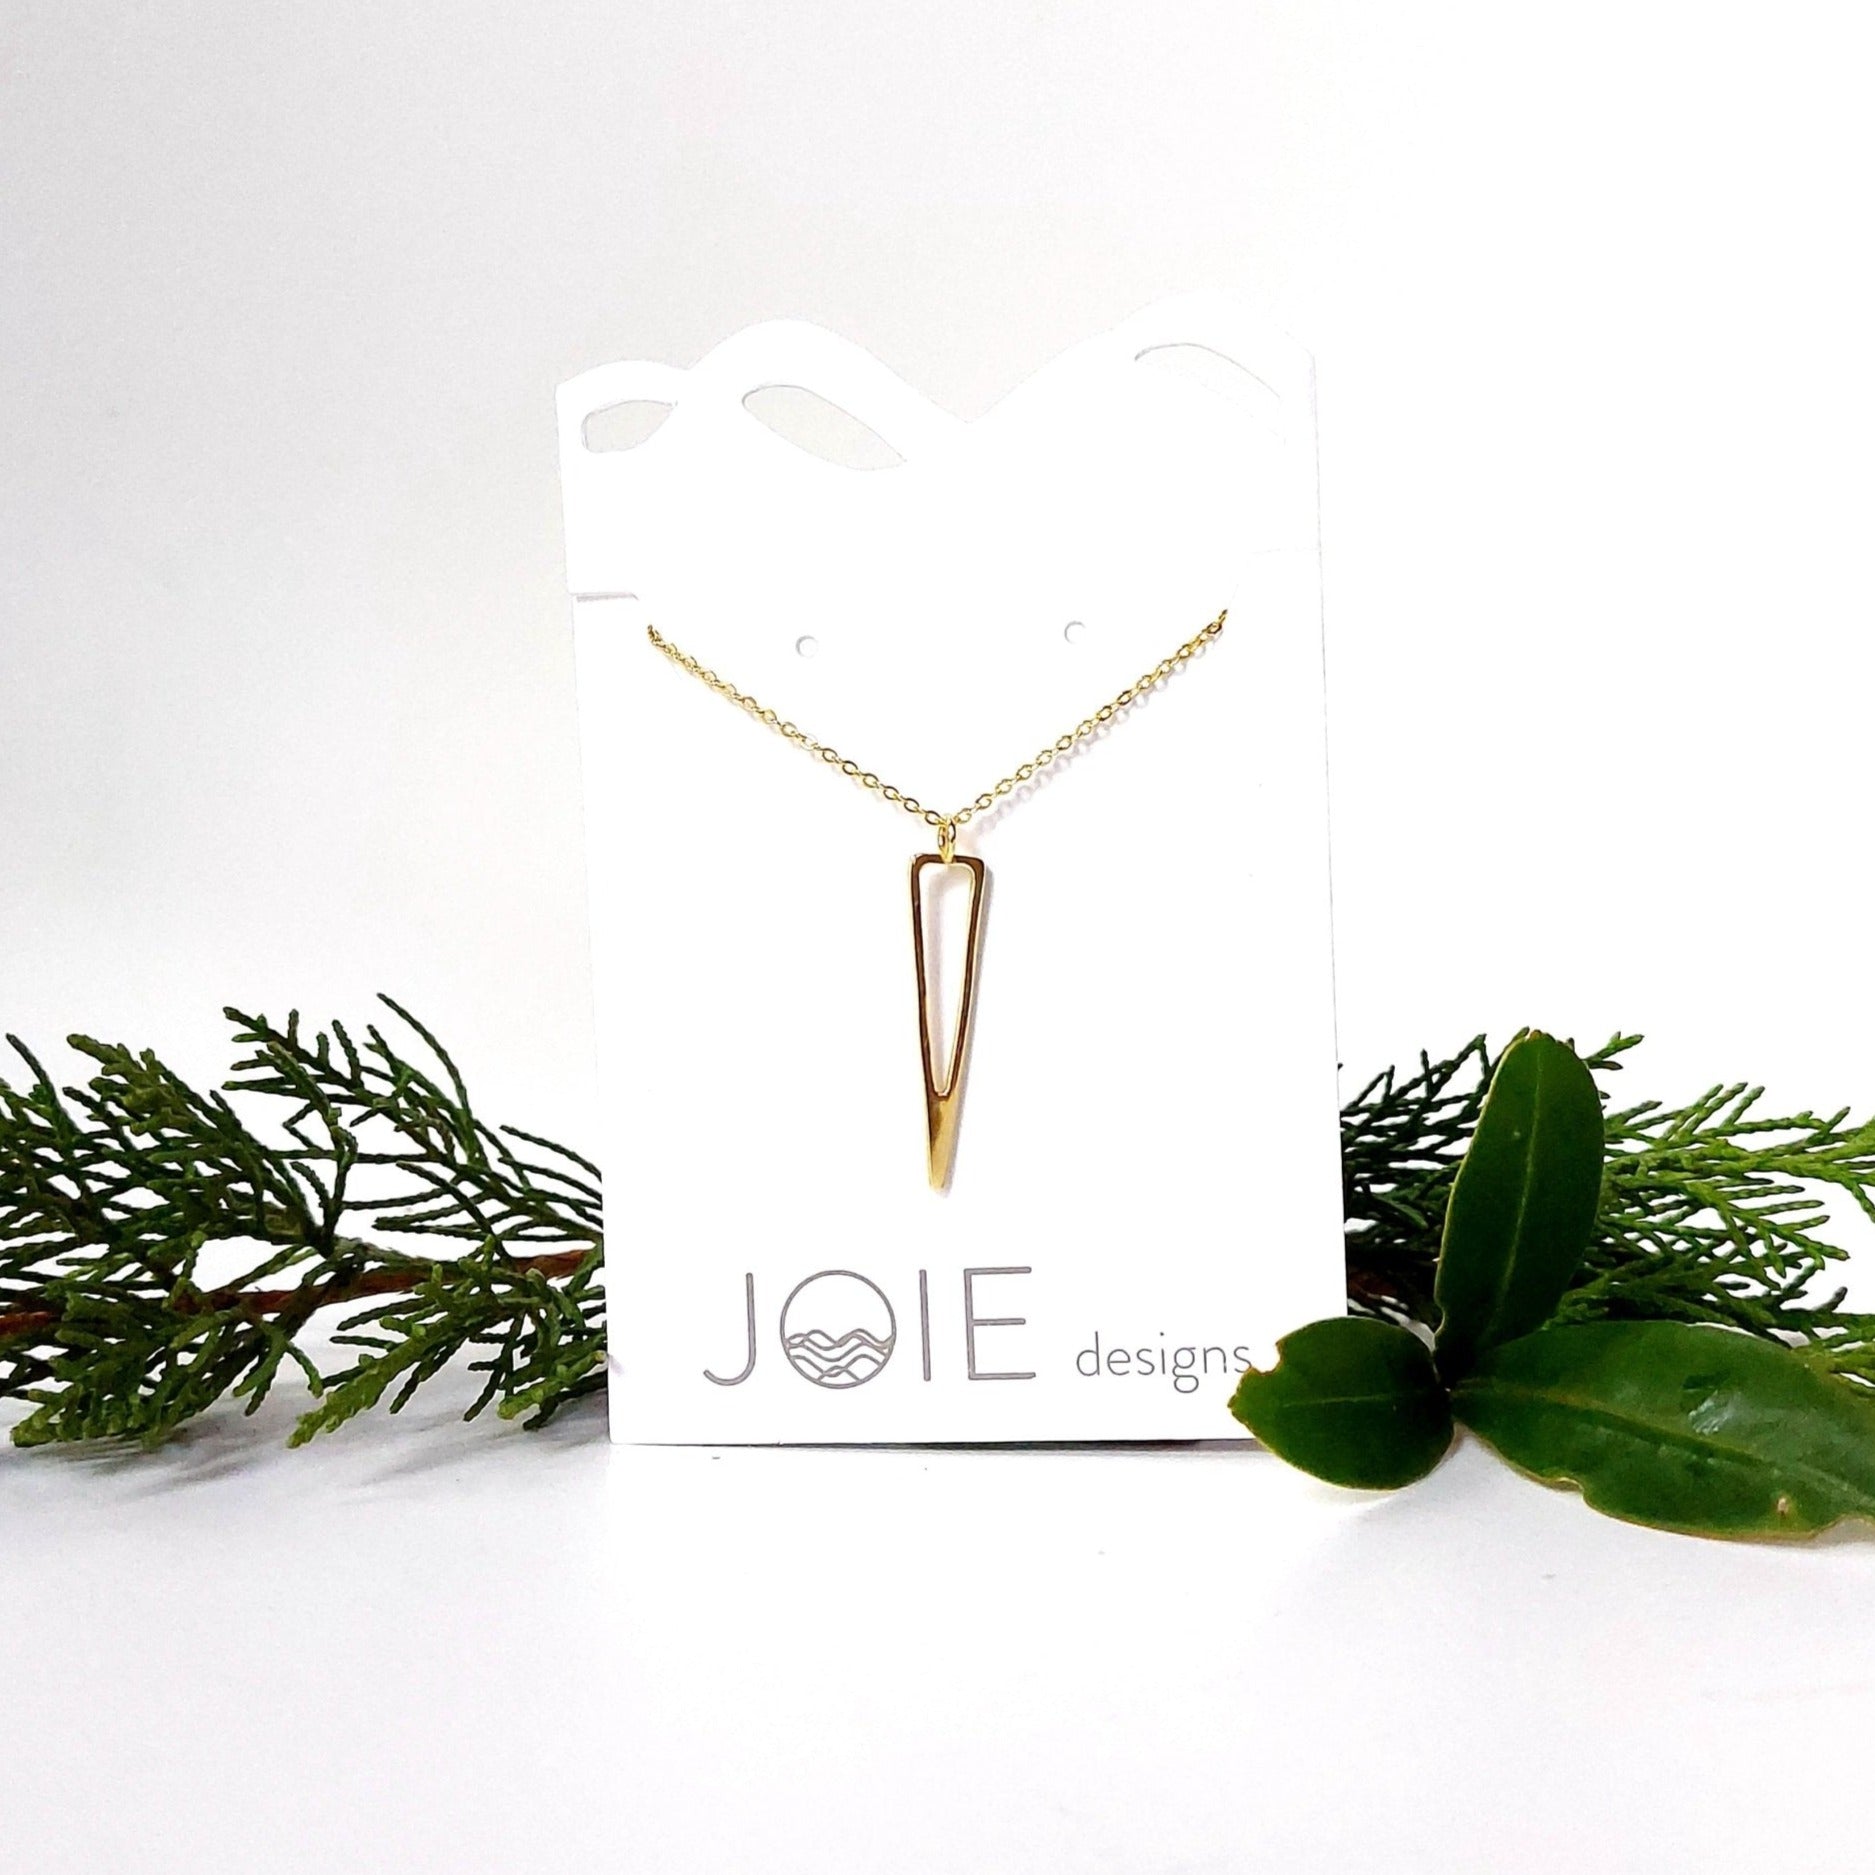 18k yellow gold plated icicle design triangle pendant necklace showcased on a jewellery card with holly and pine on each side